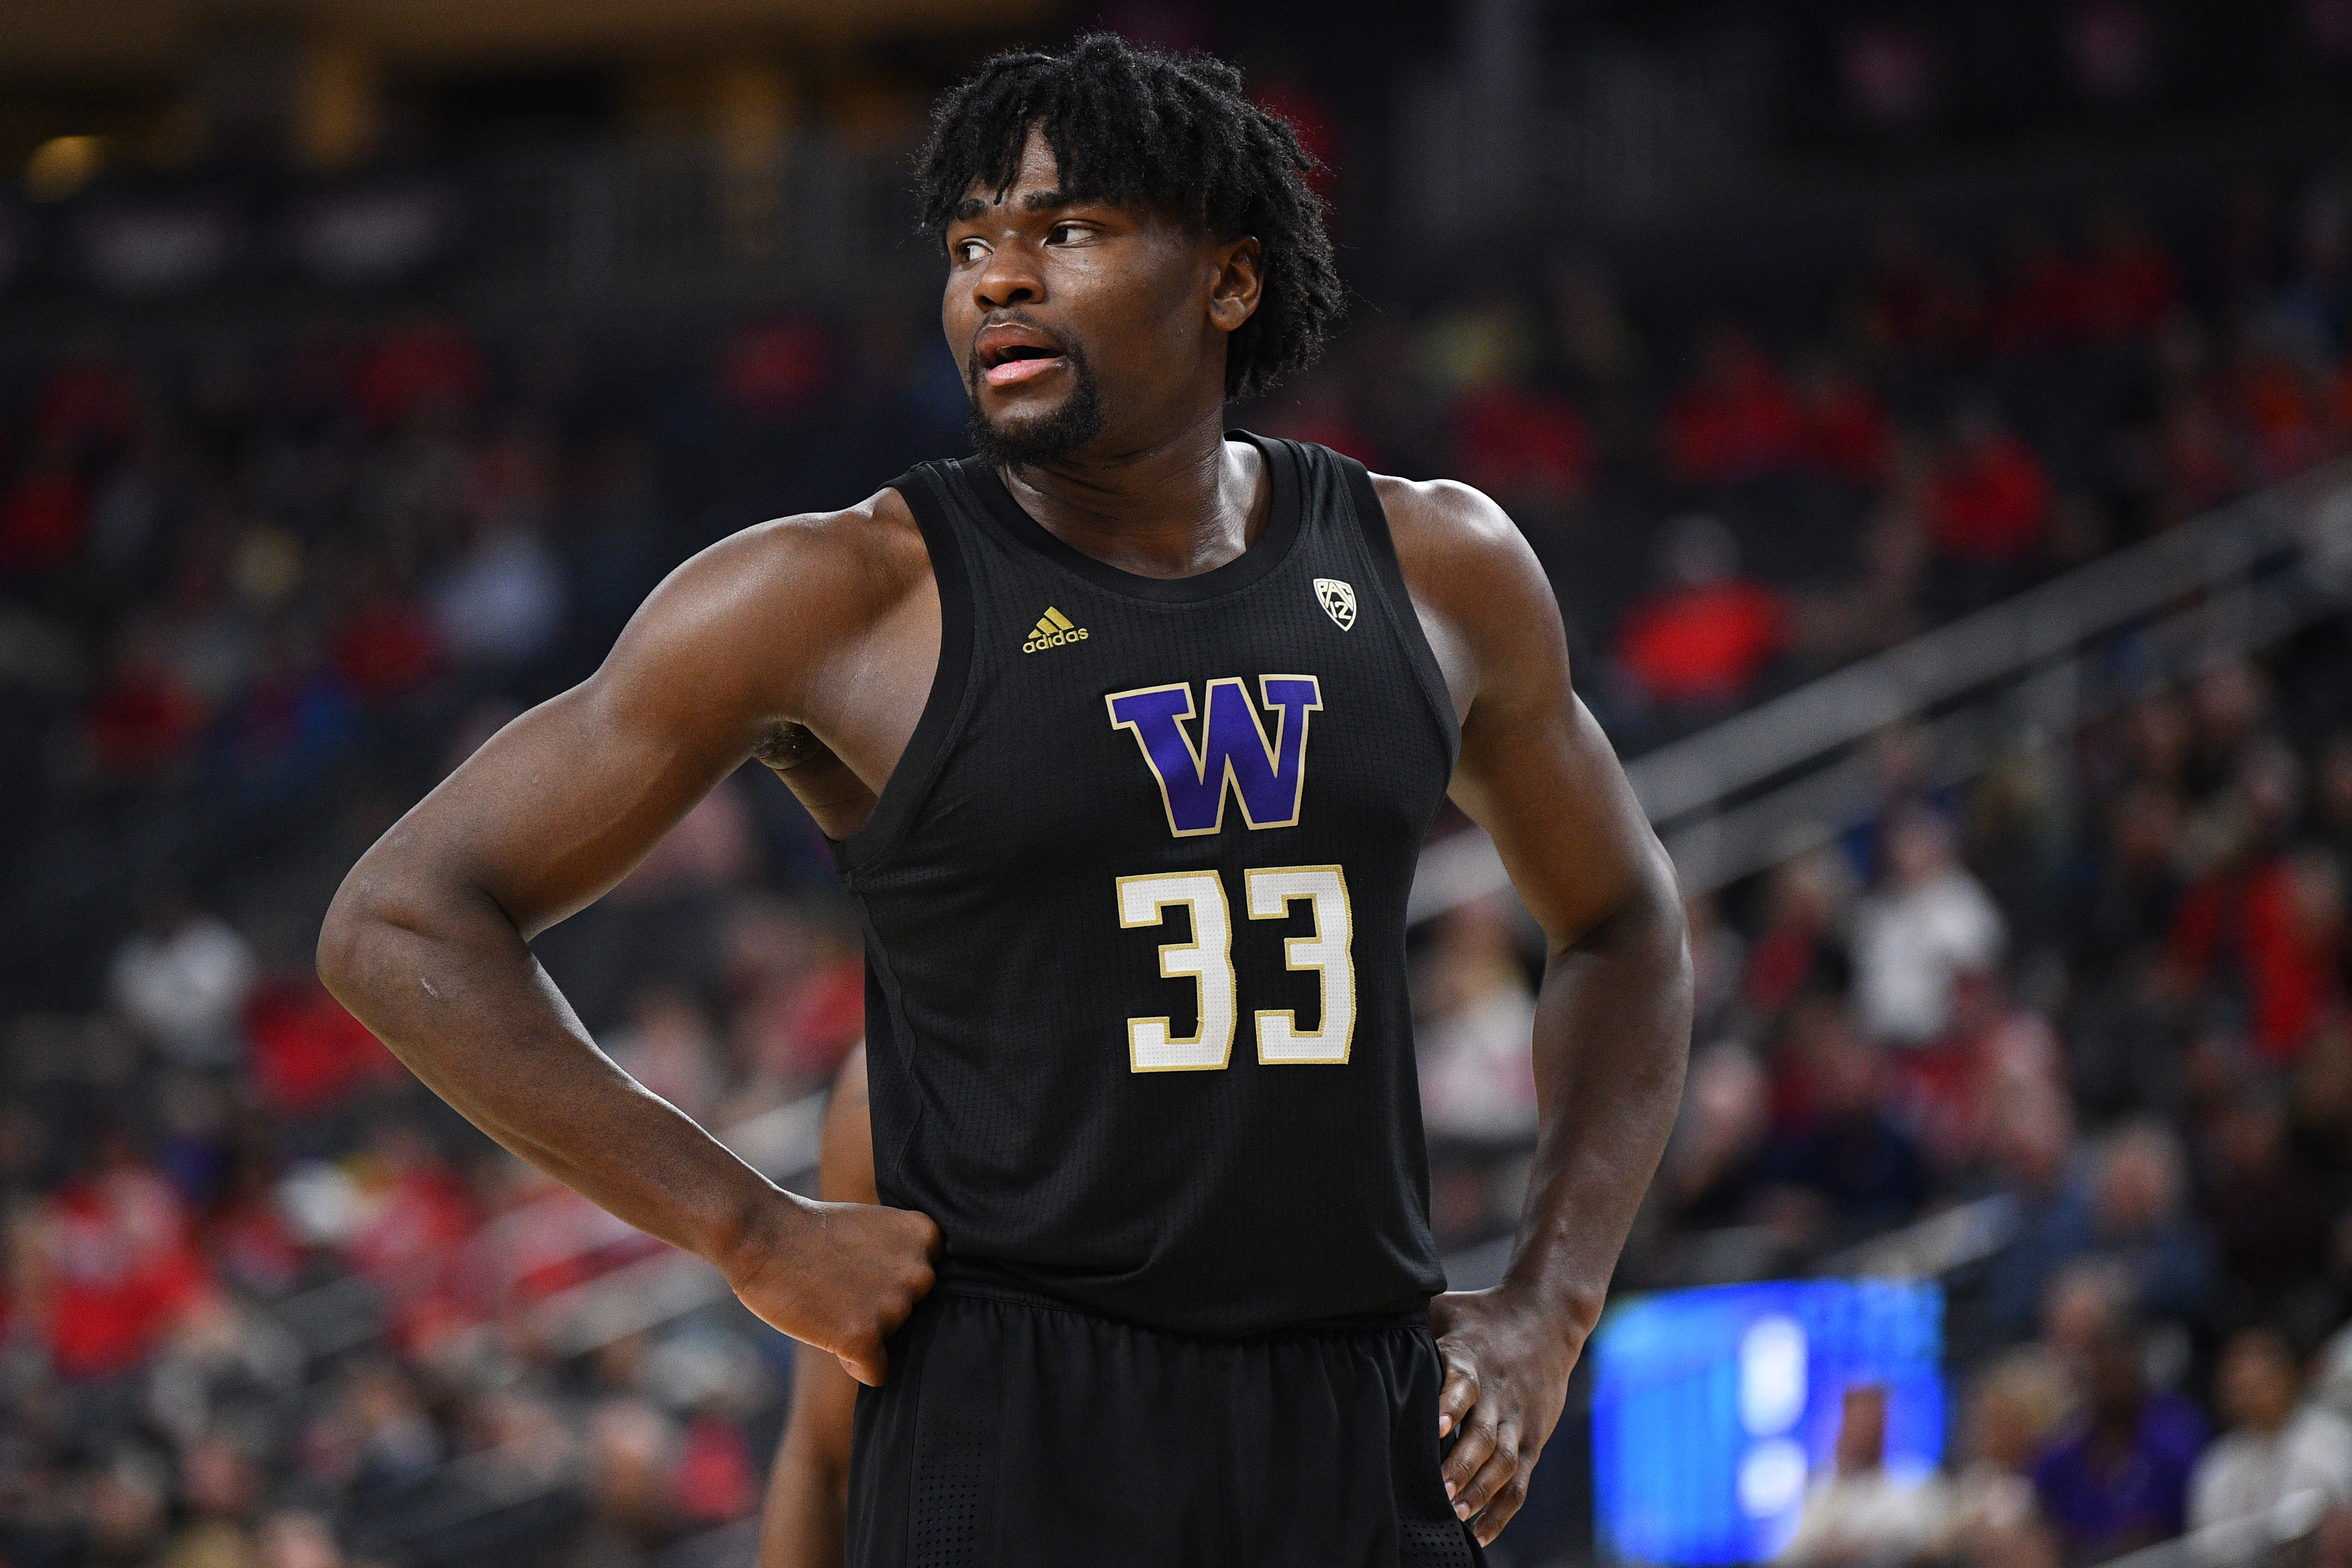 T-Wolves Draft Pick Isaiah Stewart Rejected His Idol, Patrick Ewing, to Play for the Washington Huskies